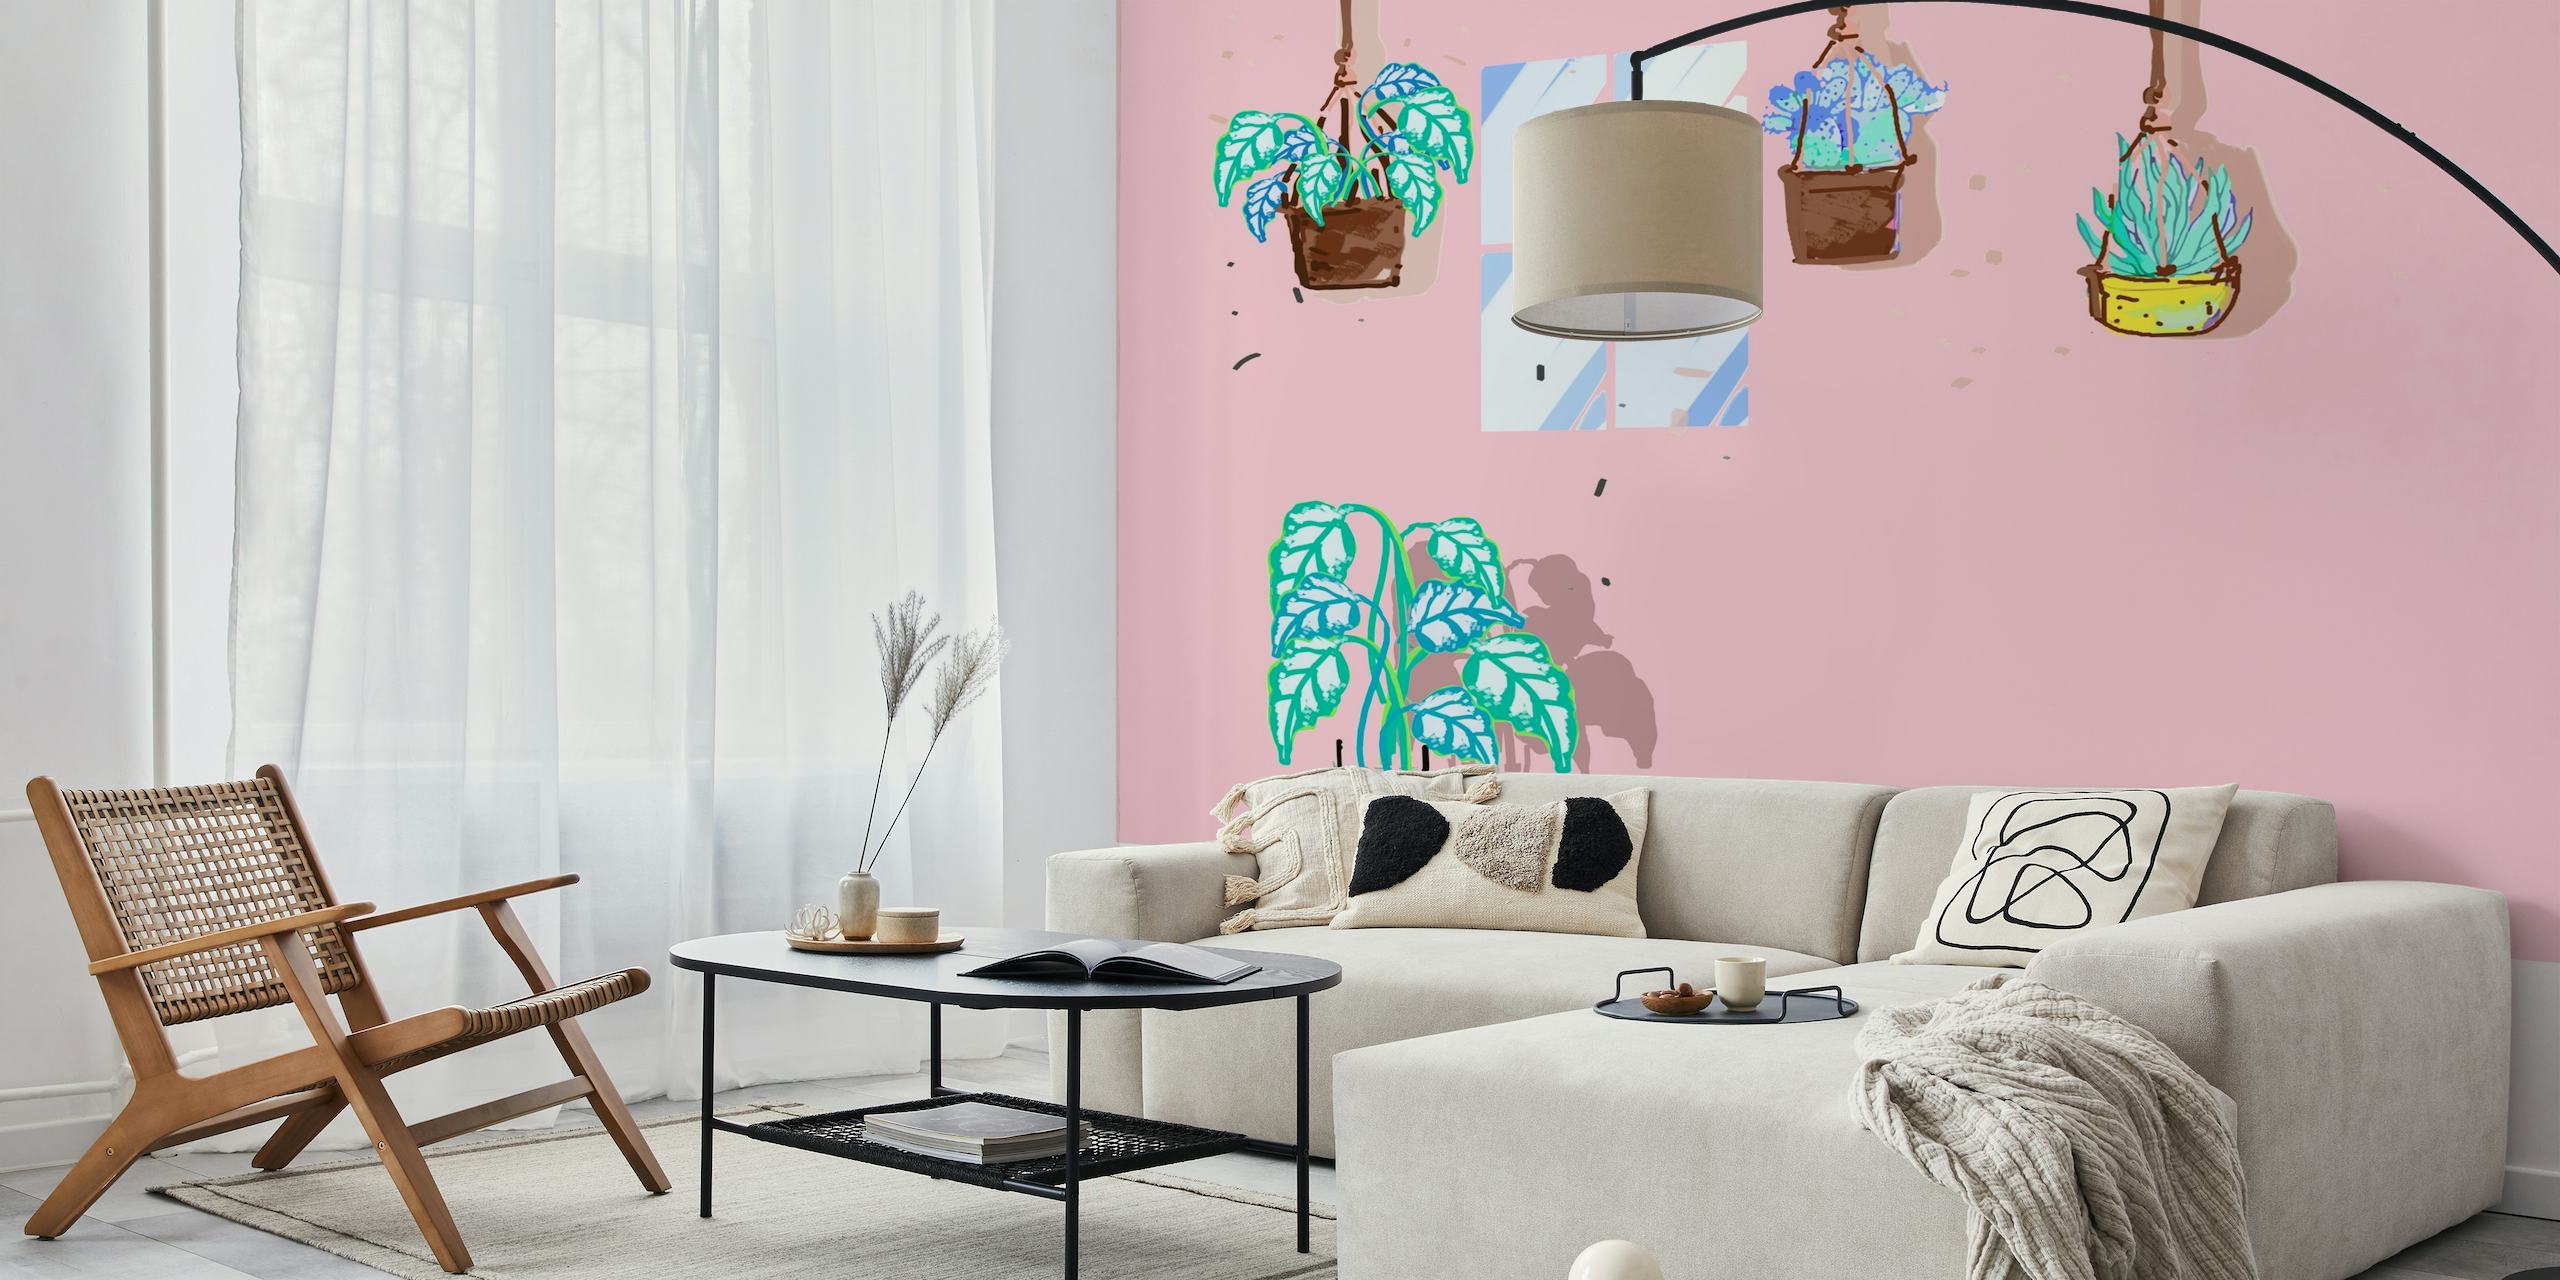 Hand-drawn house plants in pots wall mural on a pink background